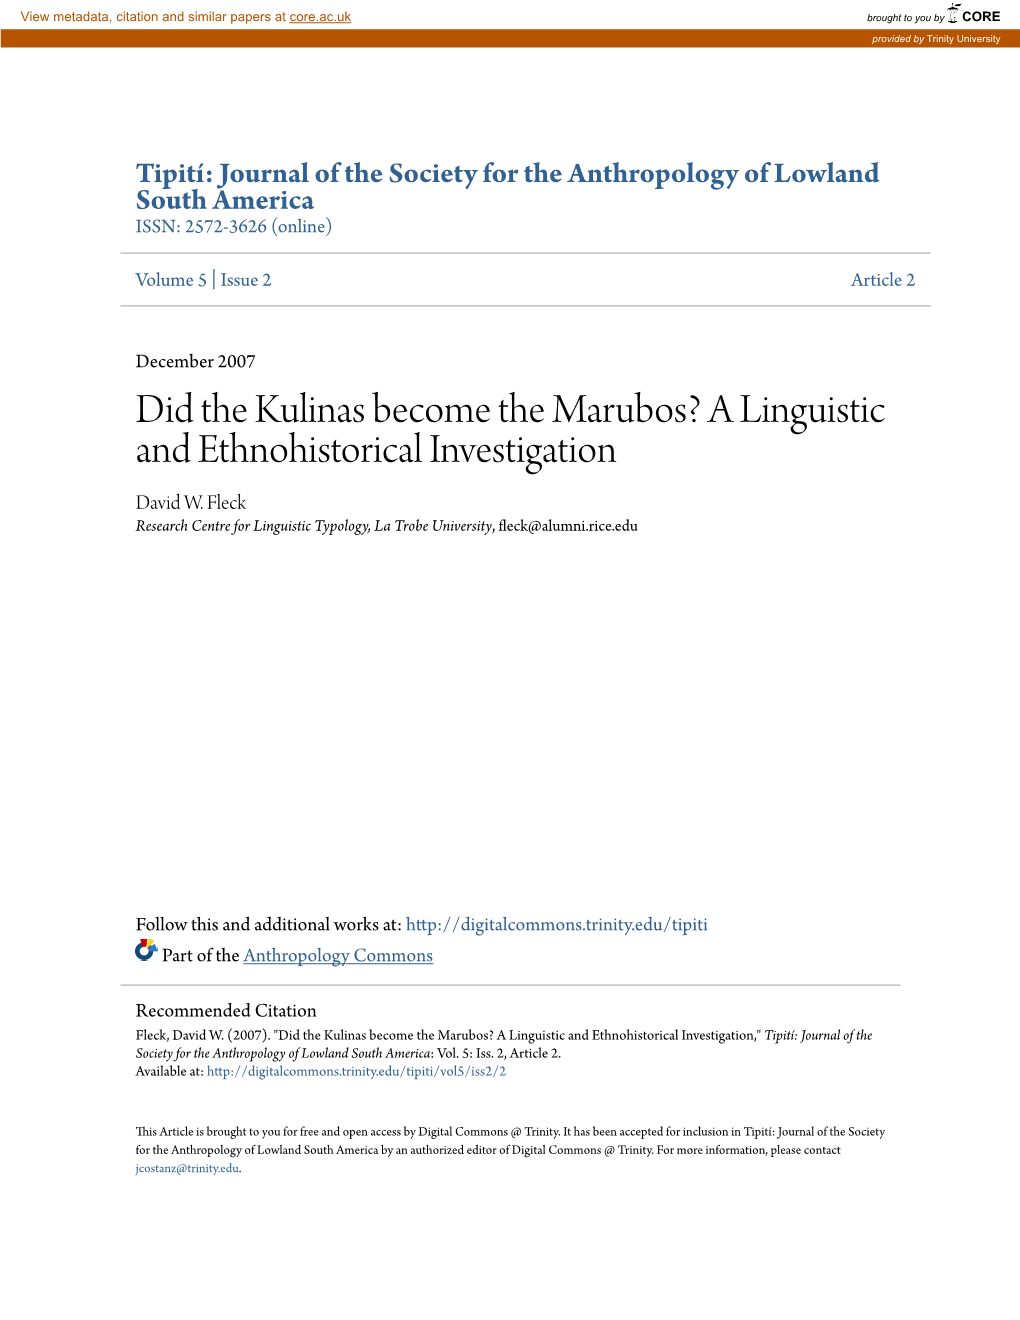 Did the Kulinas Become the Marubos? a Linguistic and Ethnohistorical Investigation David W